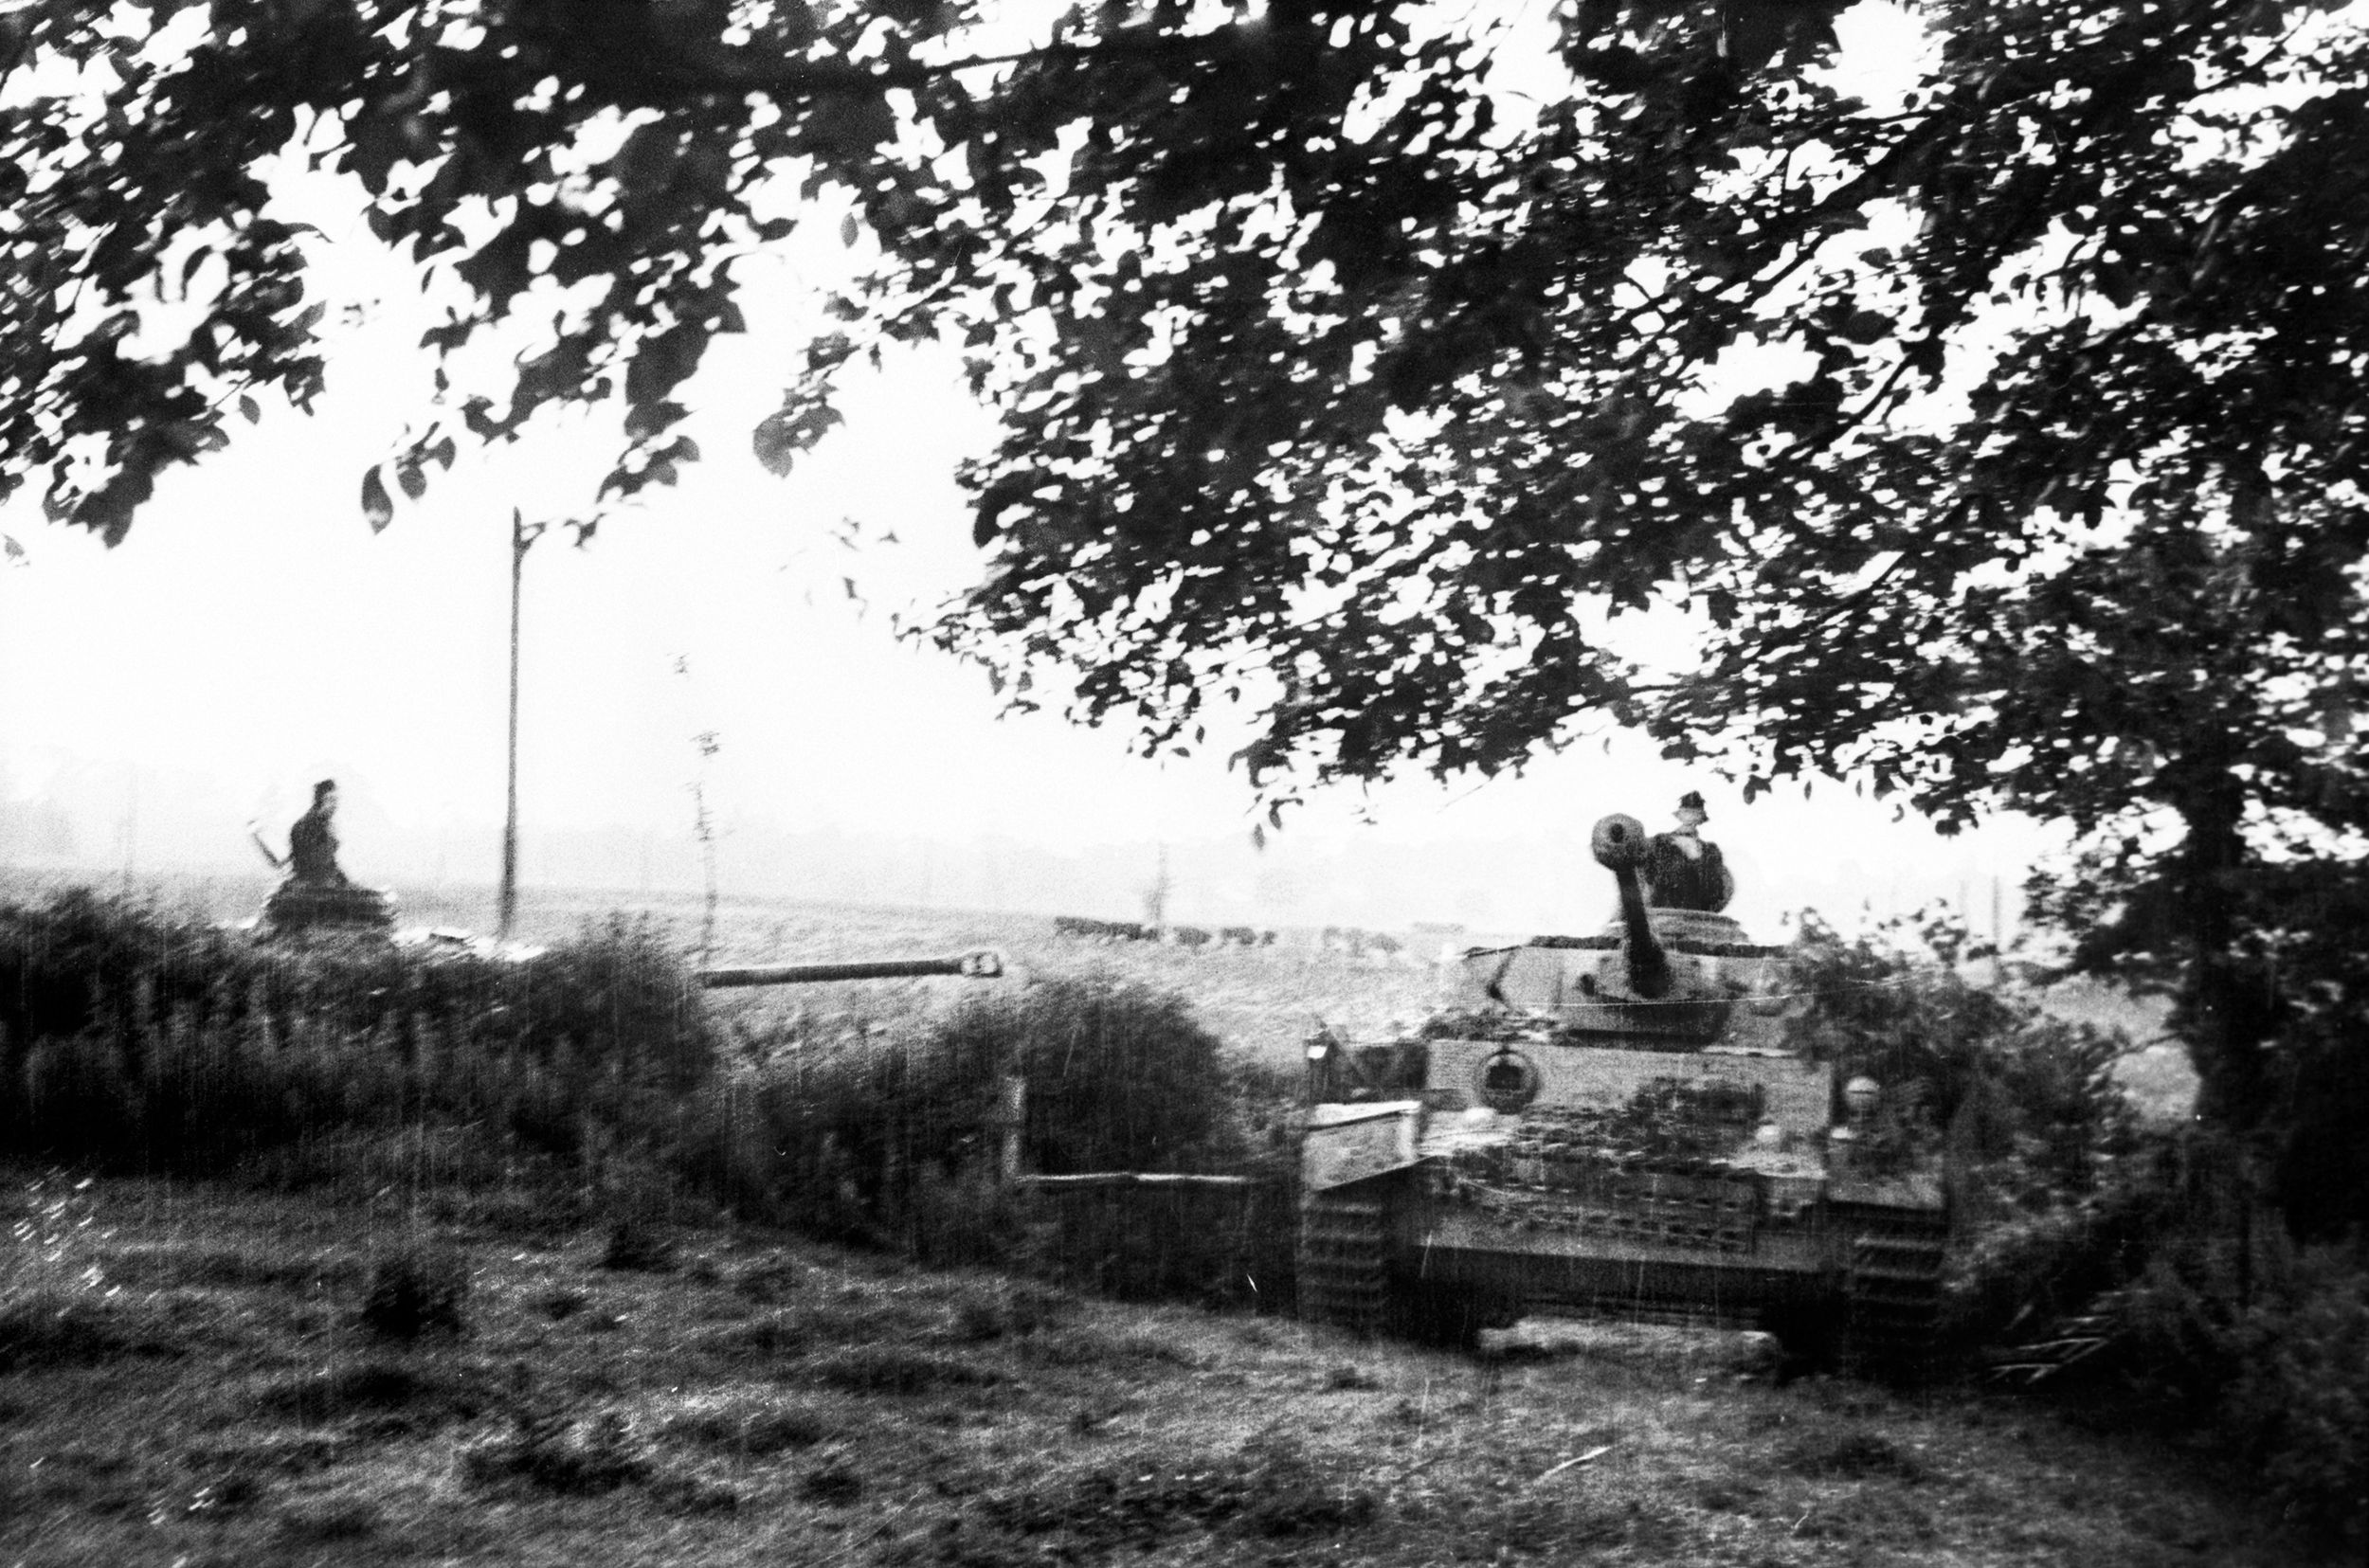 Deployed east of the Orne River in Normandy, tanks of the 21st Panzer Division pause during operations against the Allies in Normandy. Elements of the 21st Panzer reached the French coastline late on D-Day, fought through July, and was almost totally destroyed in the Falaise pocket in August.